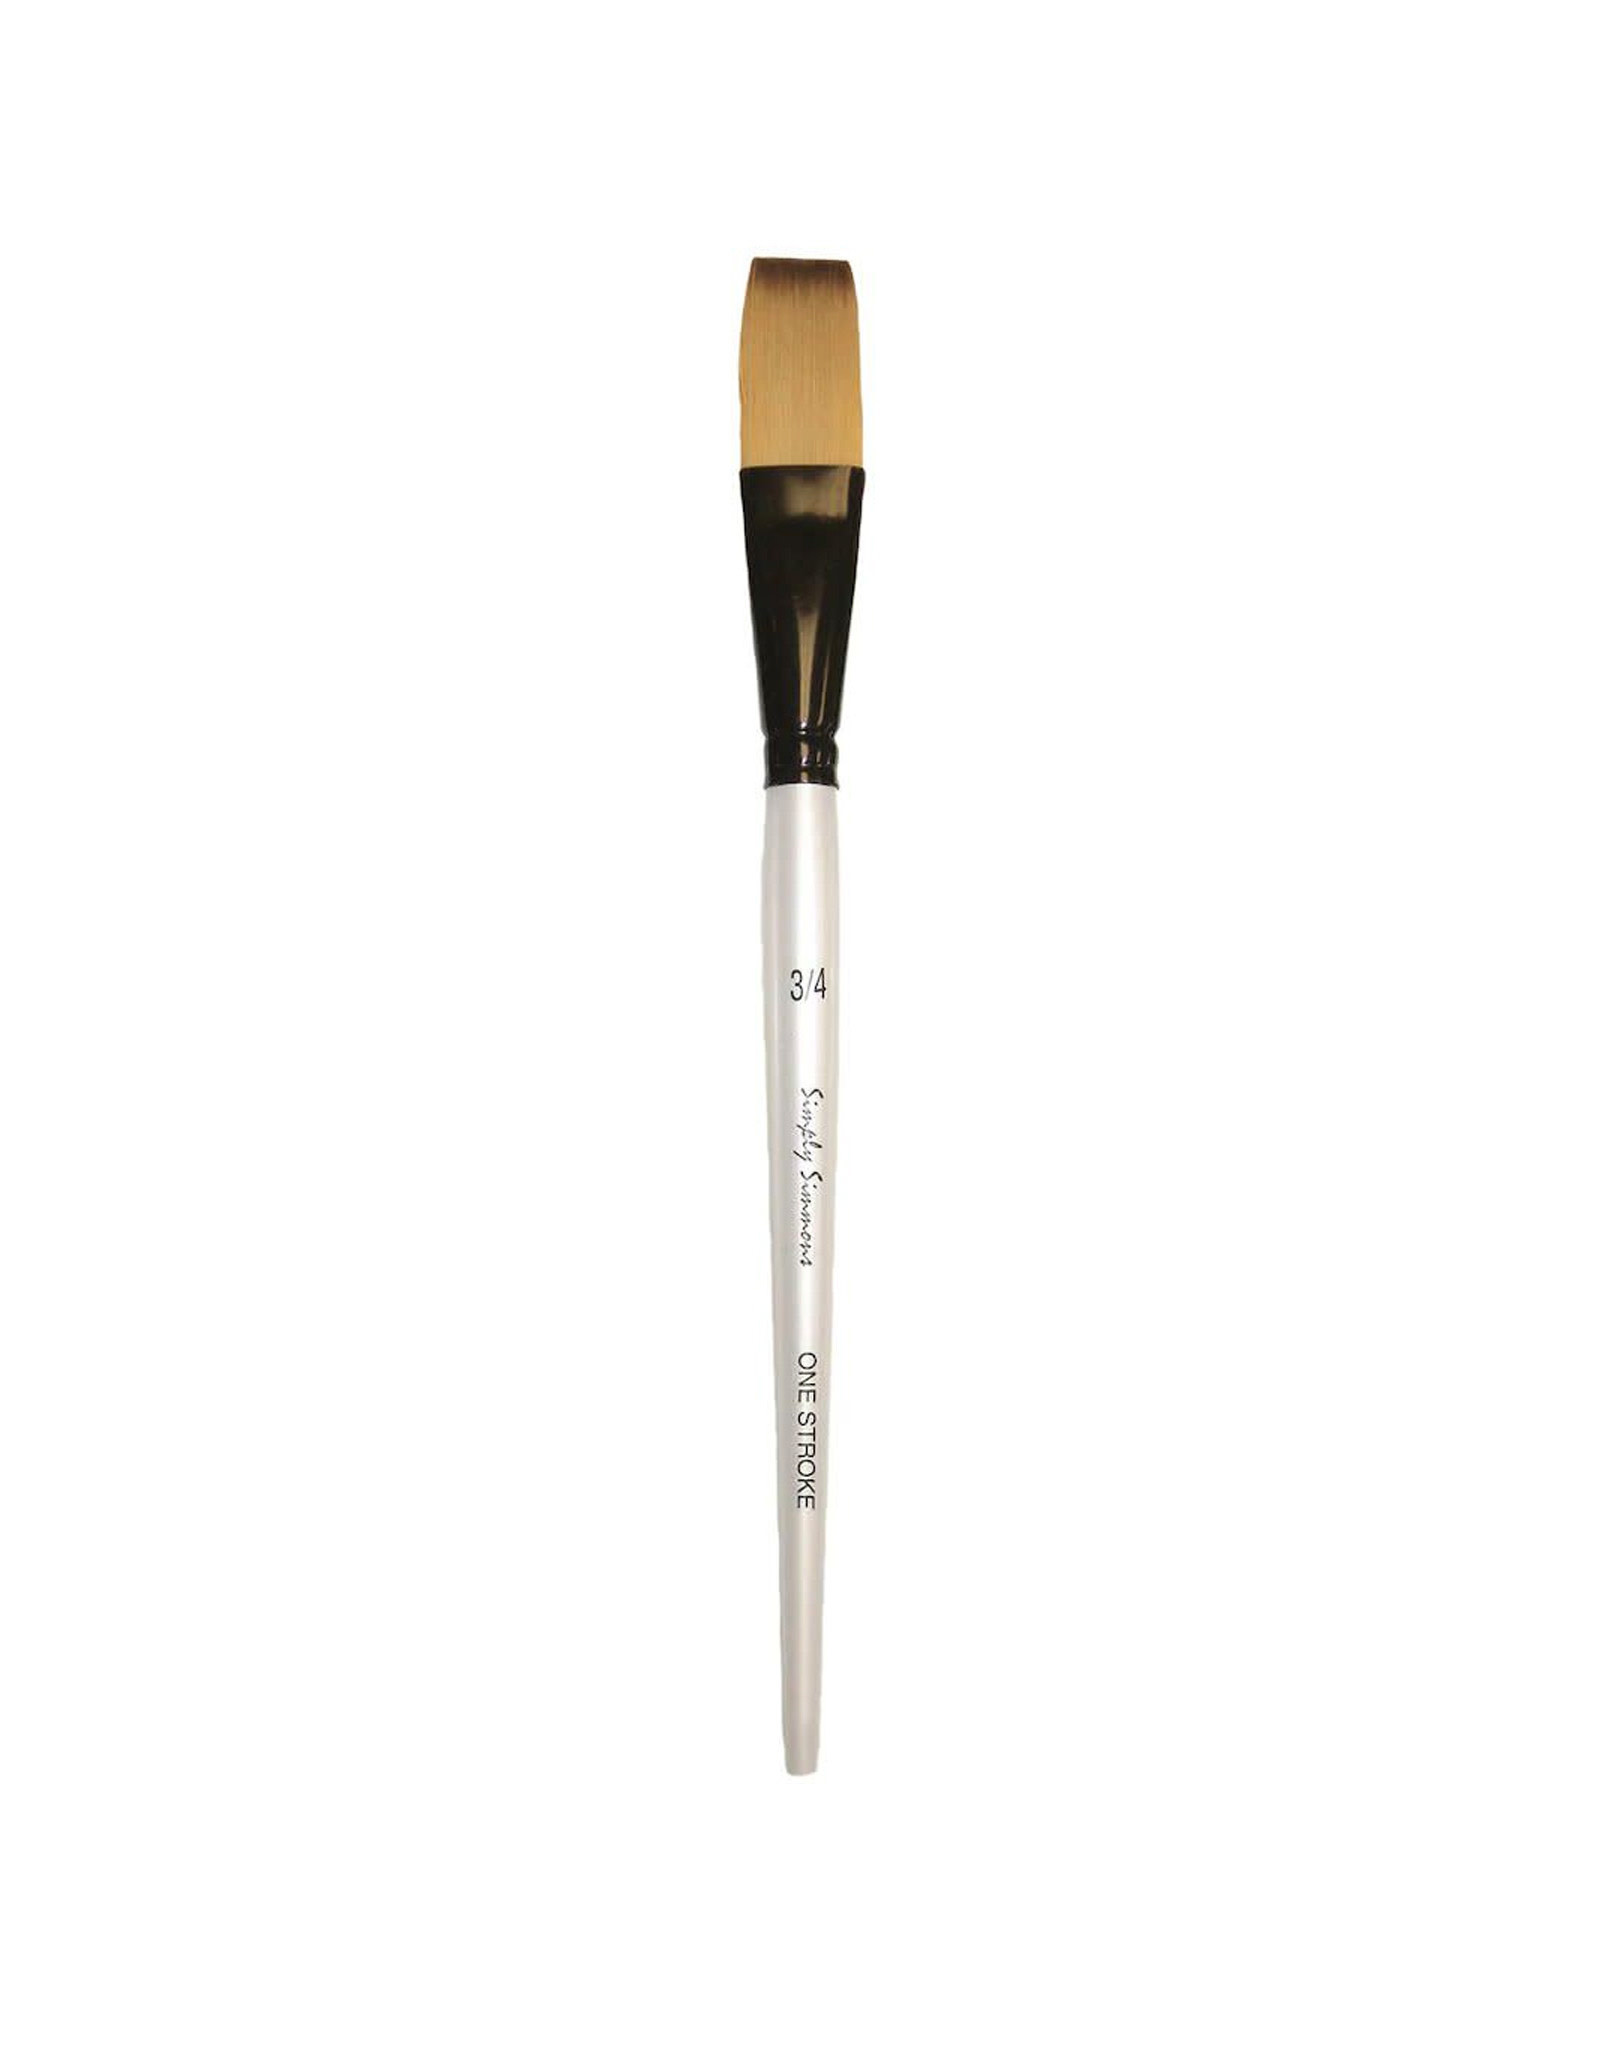 Daler-Rowney Simply Simmons Short Handle One-Stroke ¾"